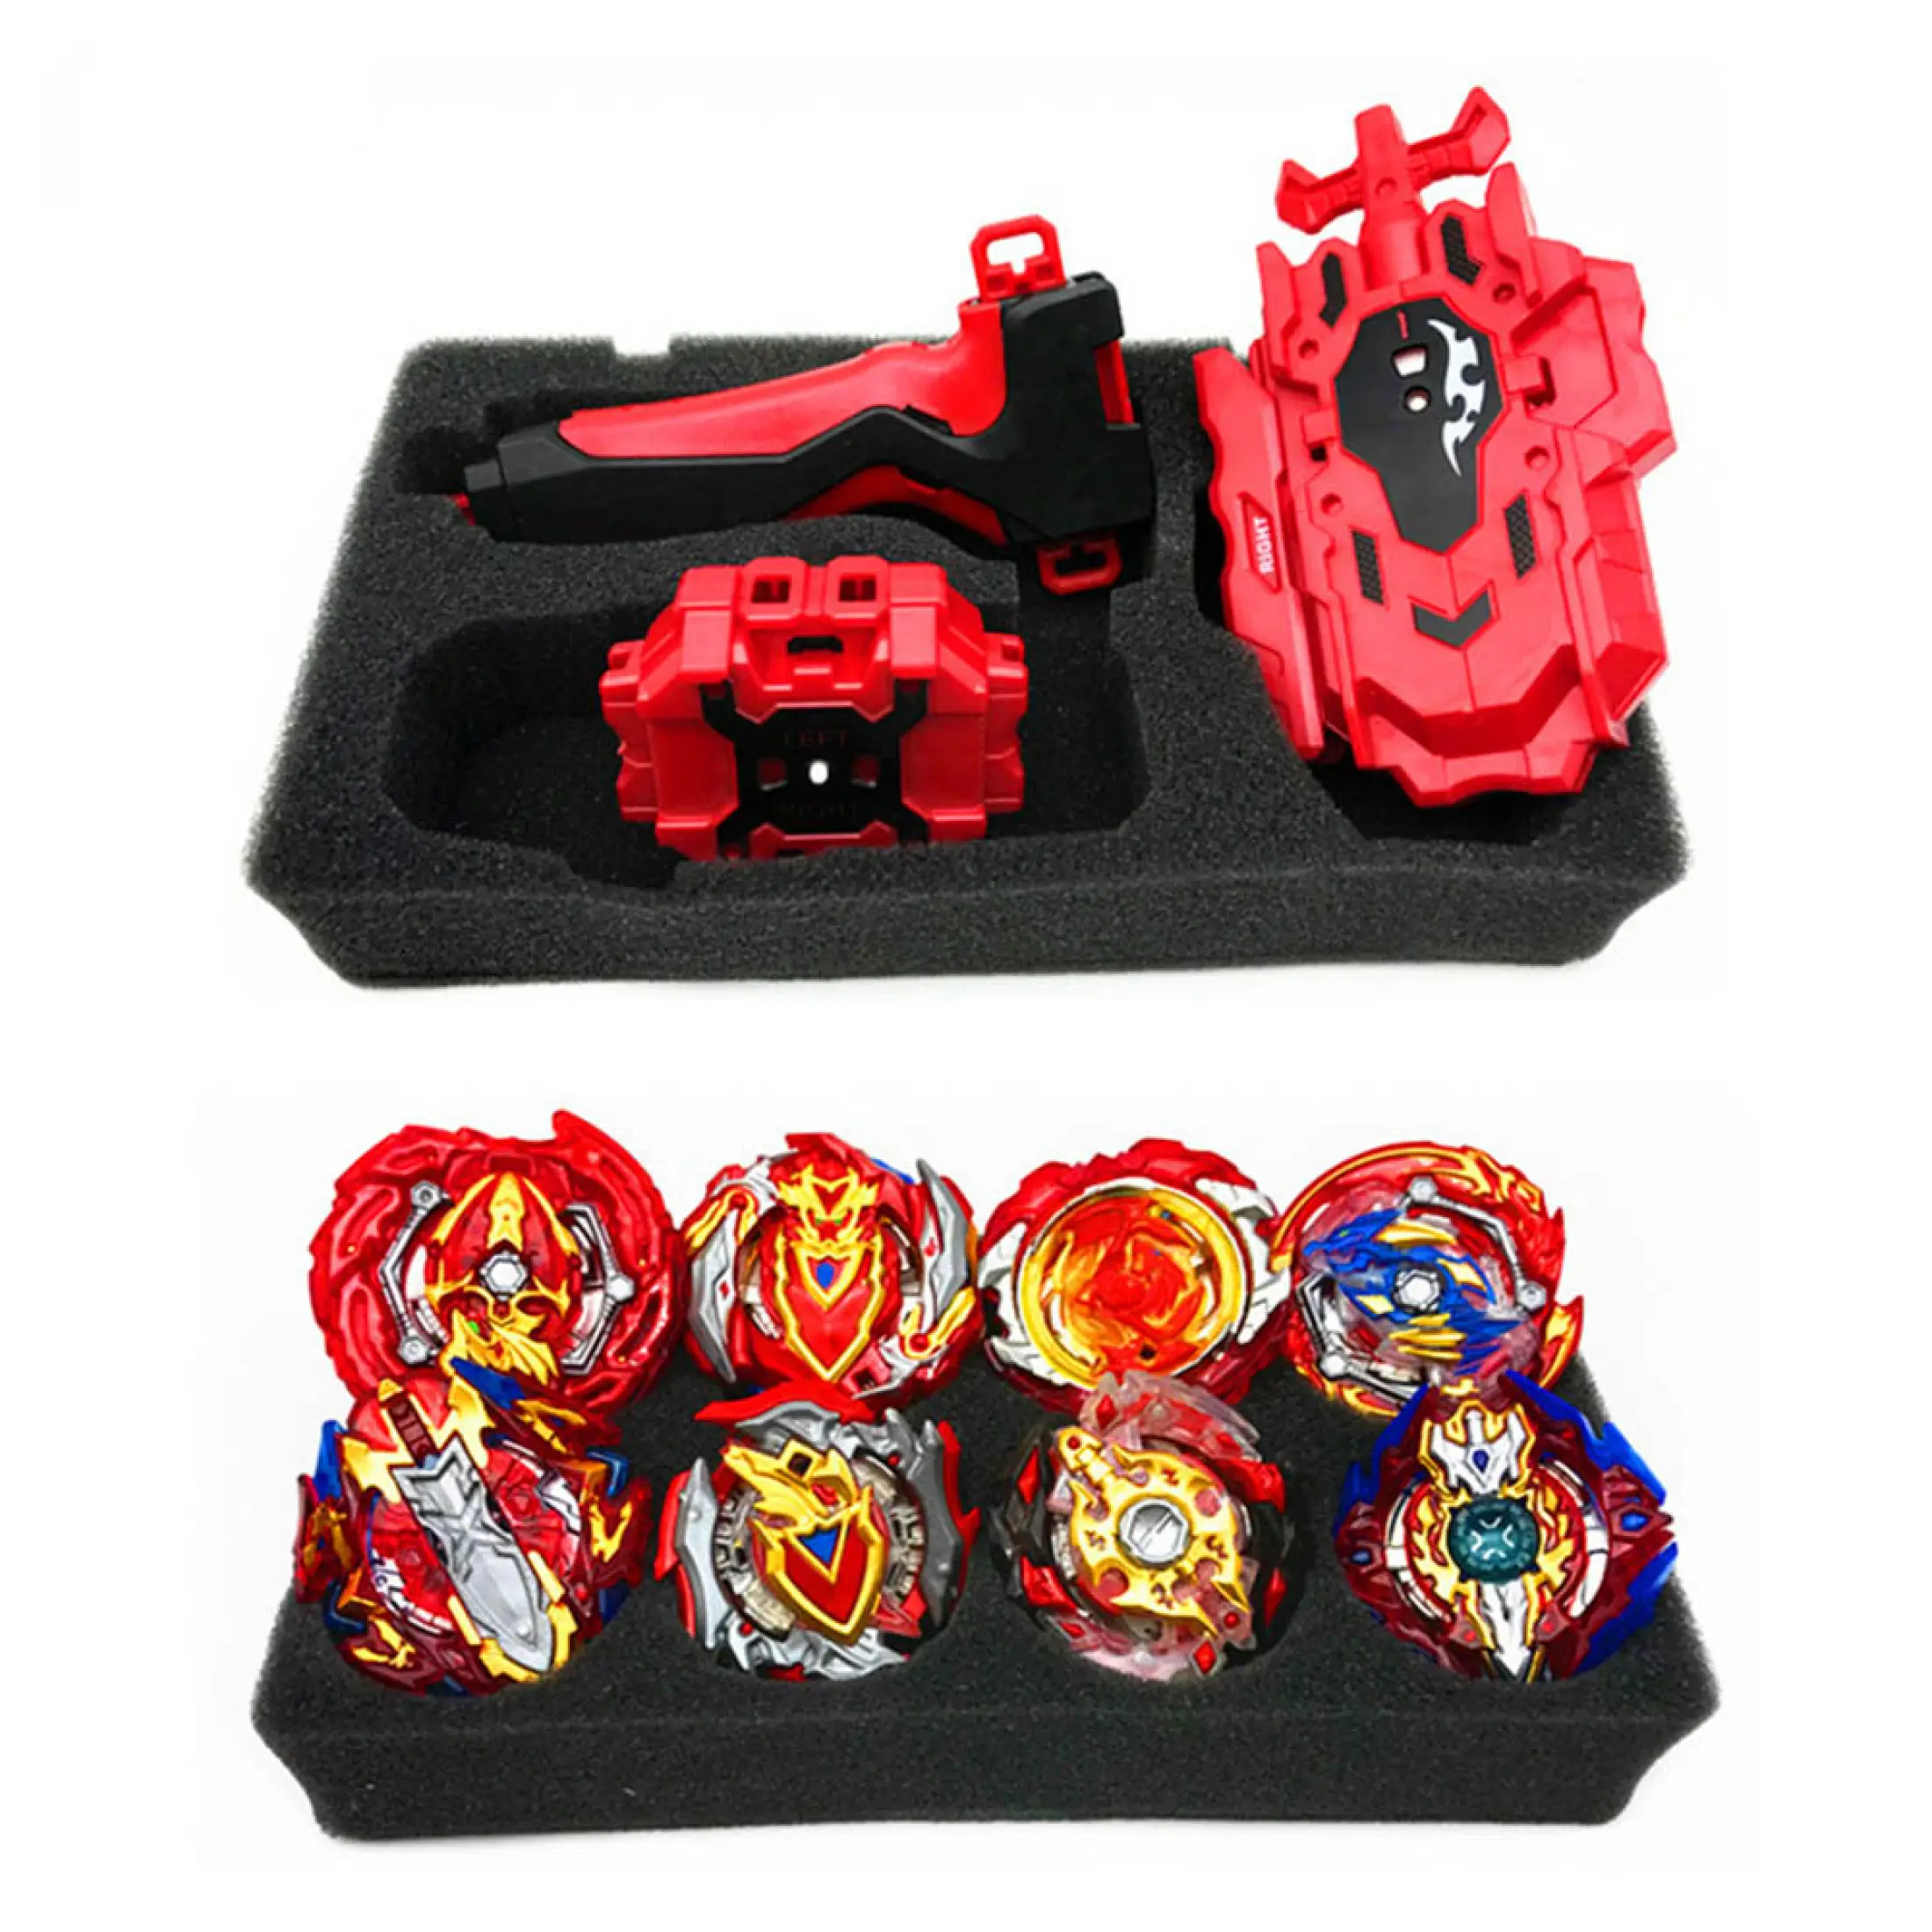 Portable Box Case Toy Xmas 8PCS Beyblade Burst Set Spinning With Grip Launcher